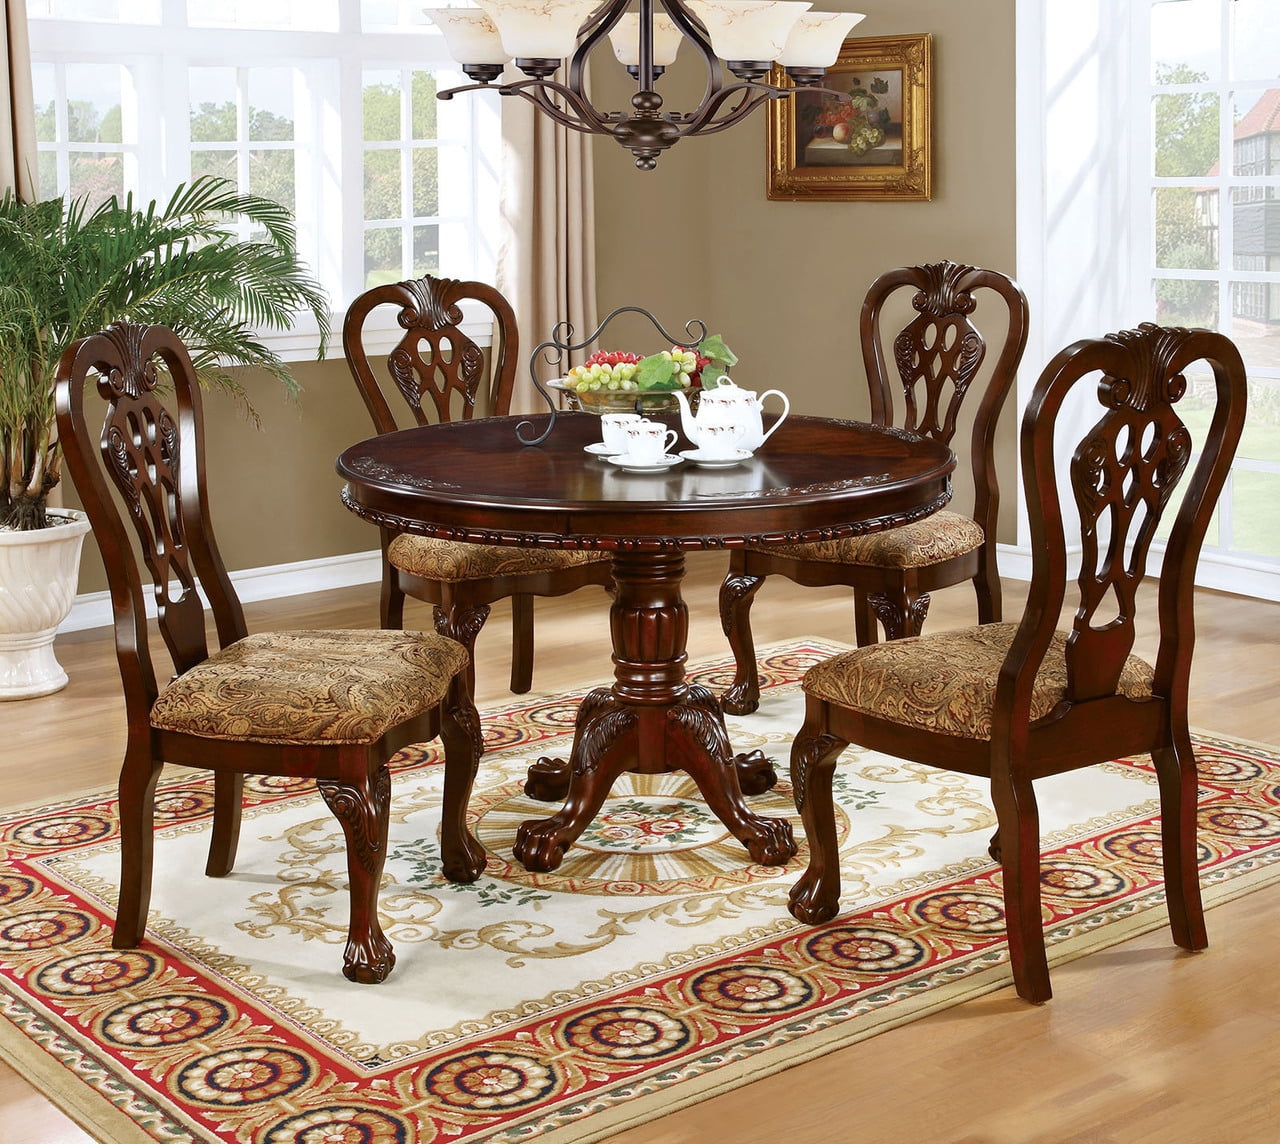  Chairs Dining Room Furniture Information